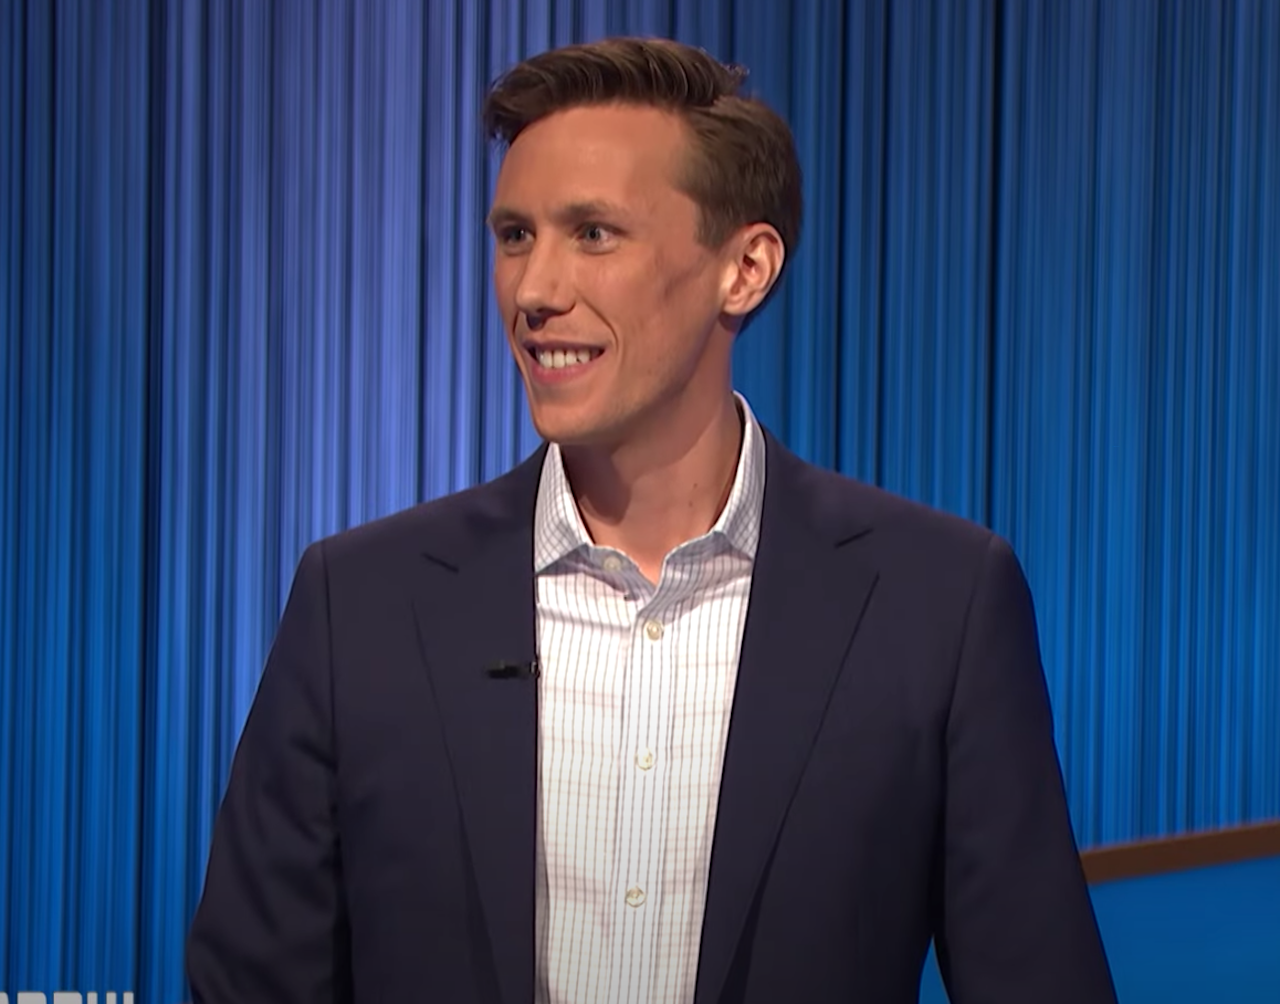 ‘Jeopardy!’: Eric Ahasic Calls Daily Doubles an ‘Integral Part’ of His Winning Strategy